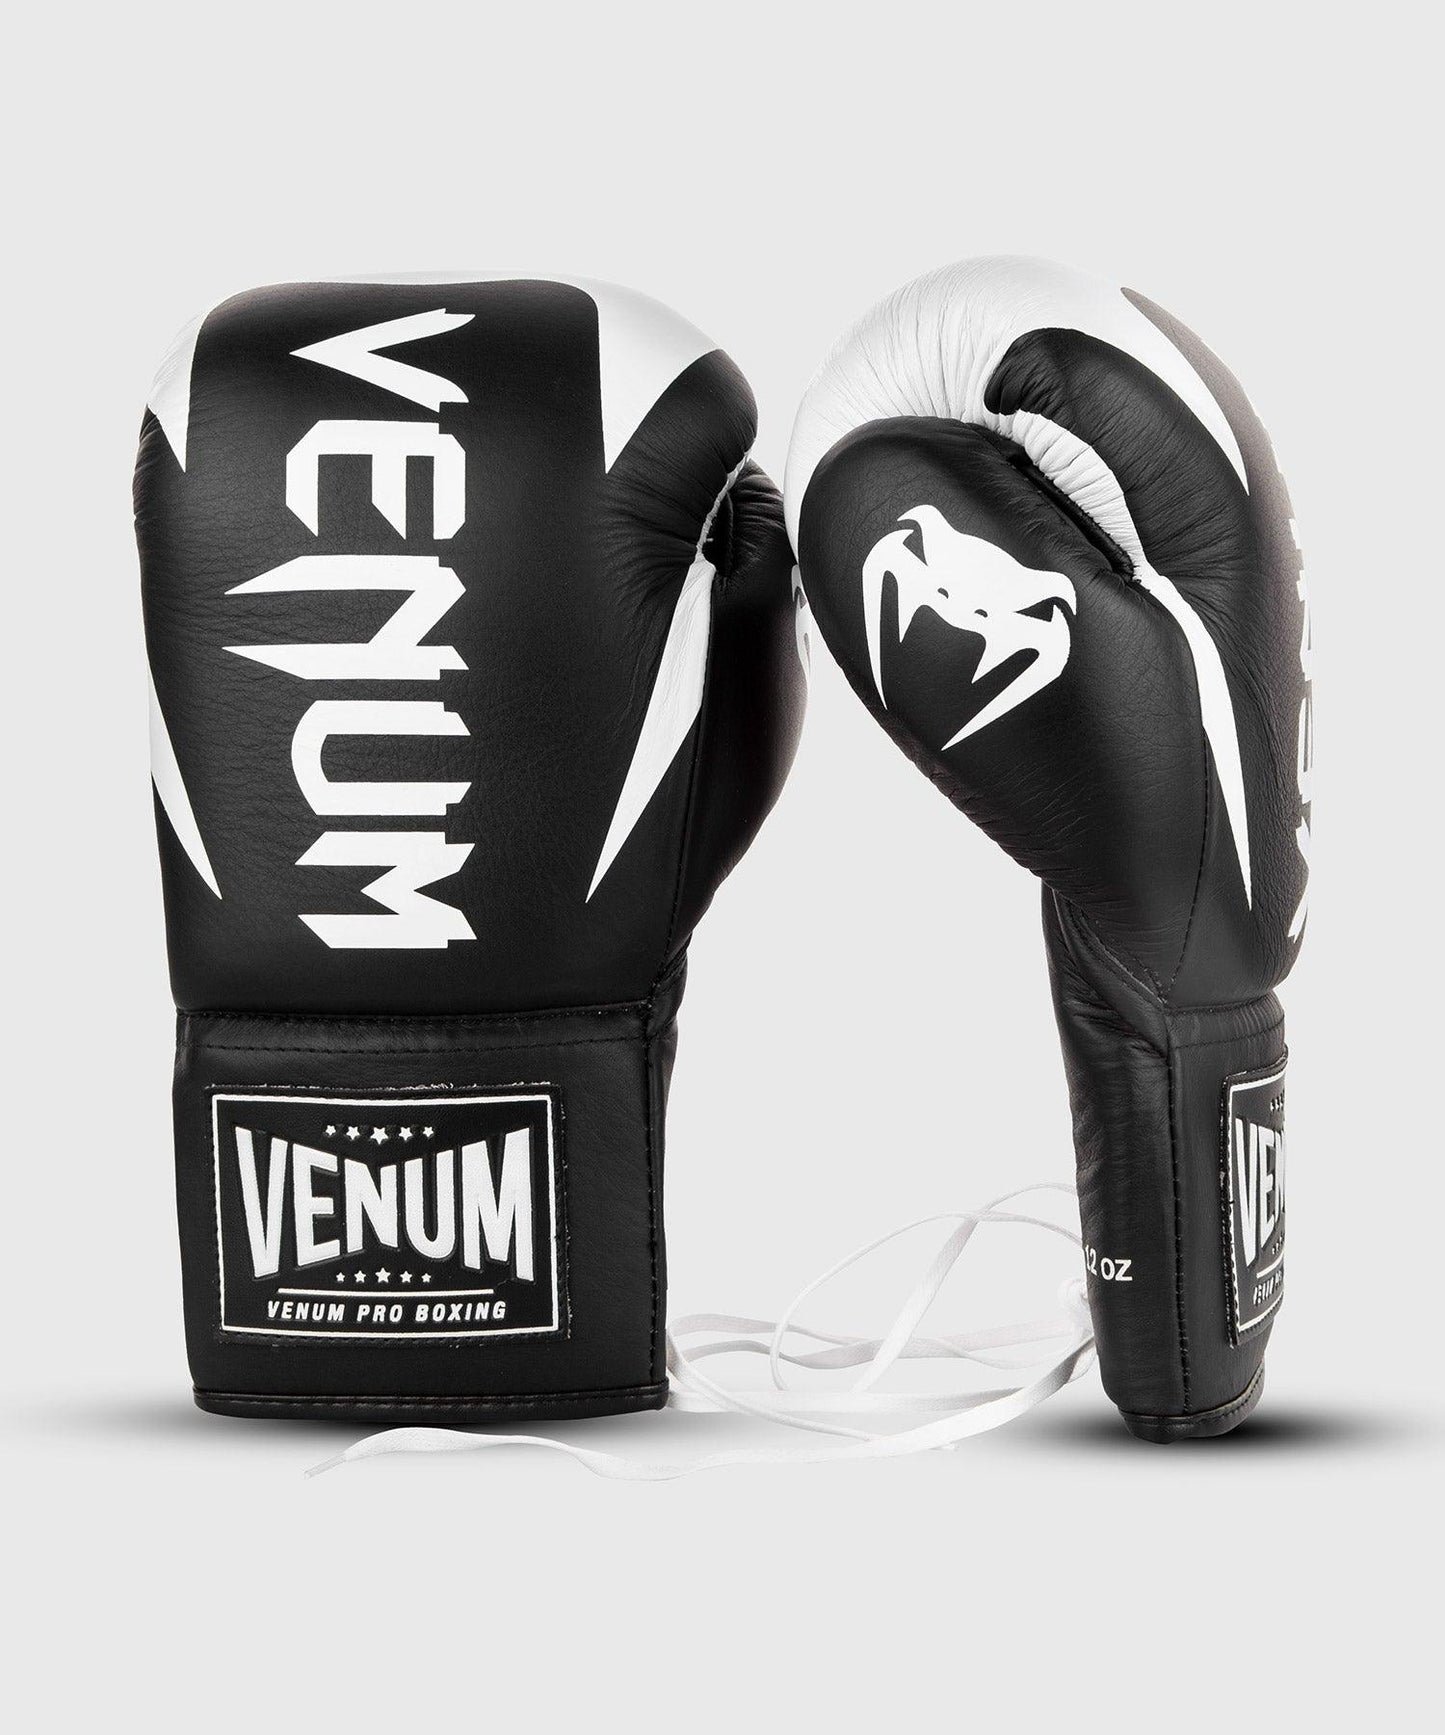 Venum Hammer Pro Boxing Gloves - With Laces - Black/White Picture 2